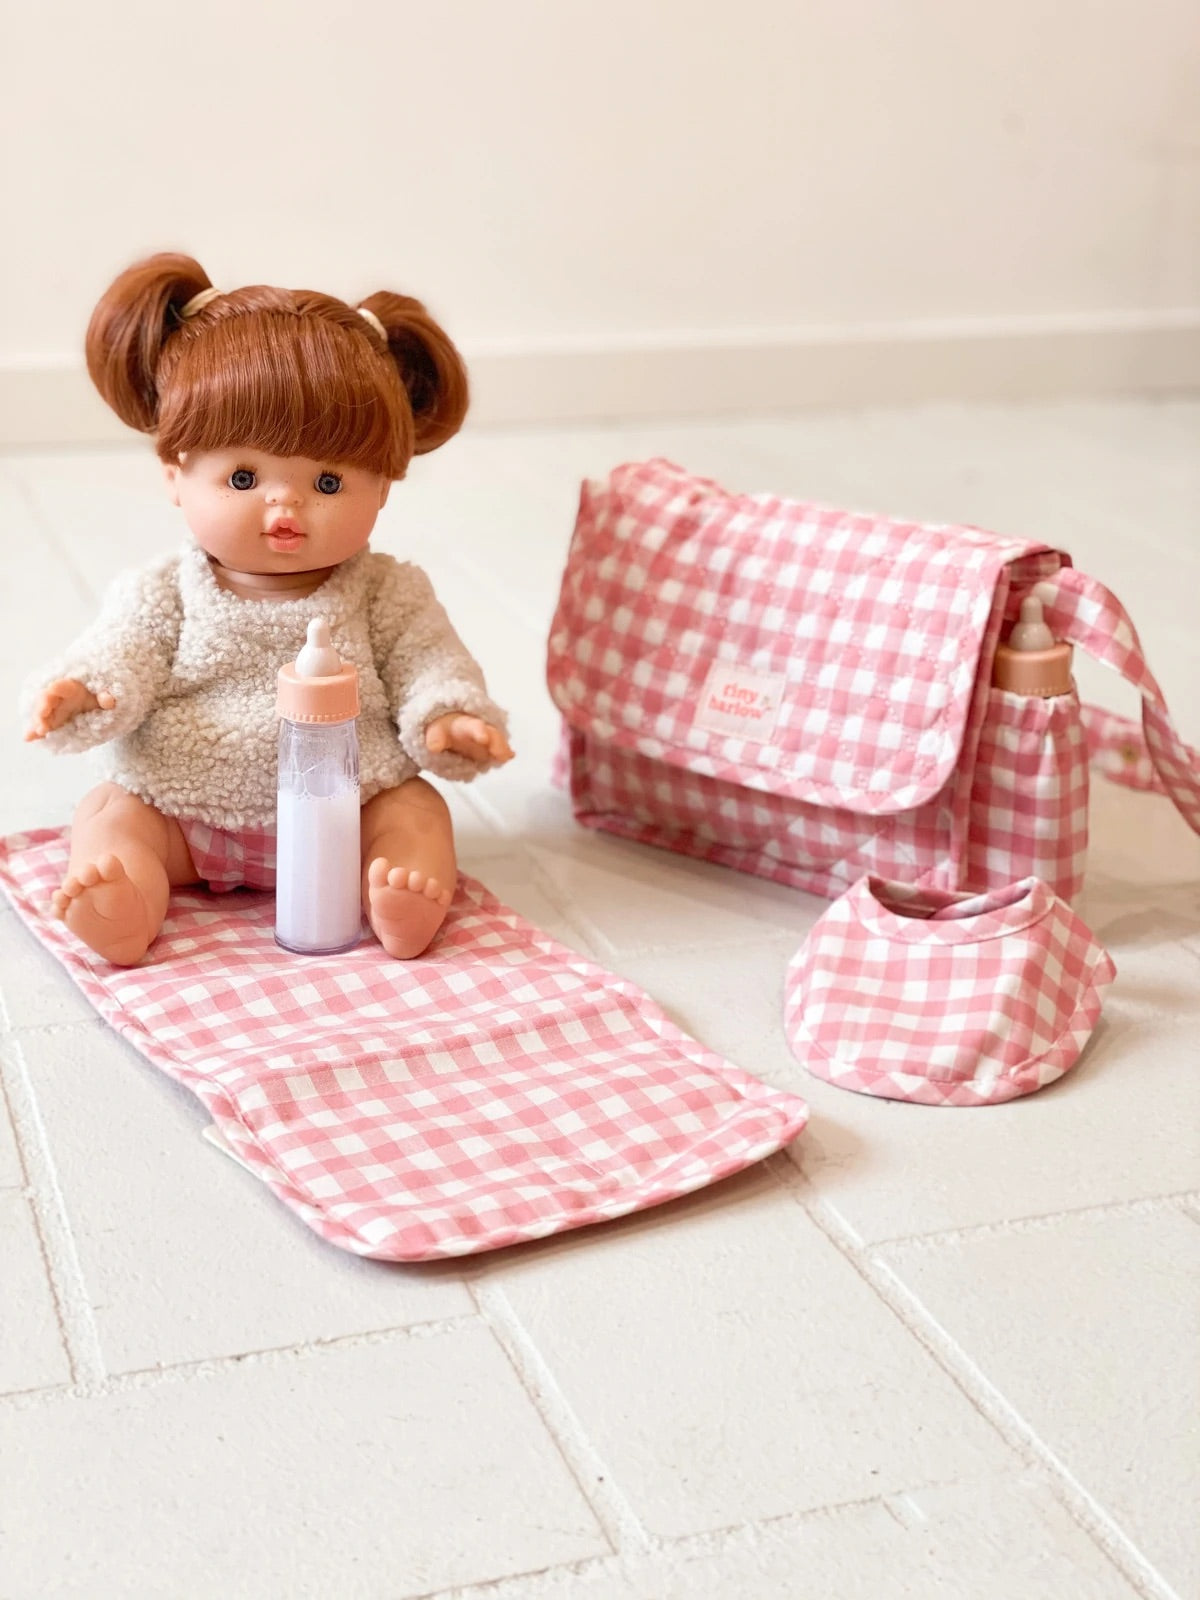 Tiny Harlow Convertible Doll's Nappy Bag Set - Pink Gingham